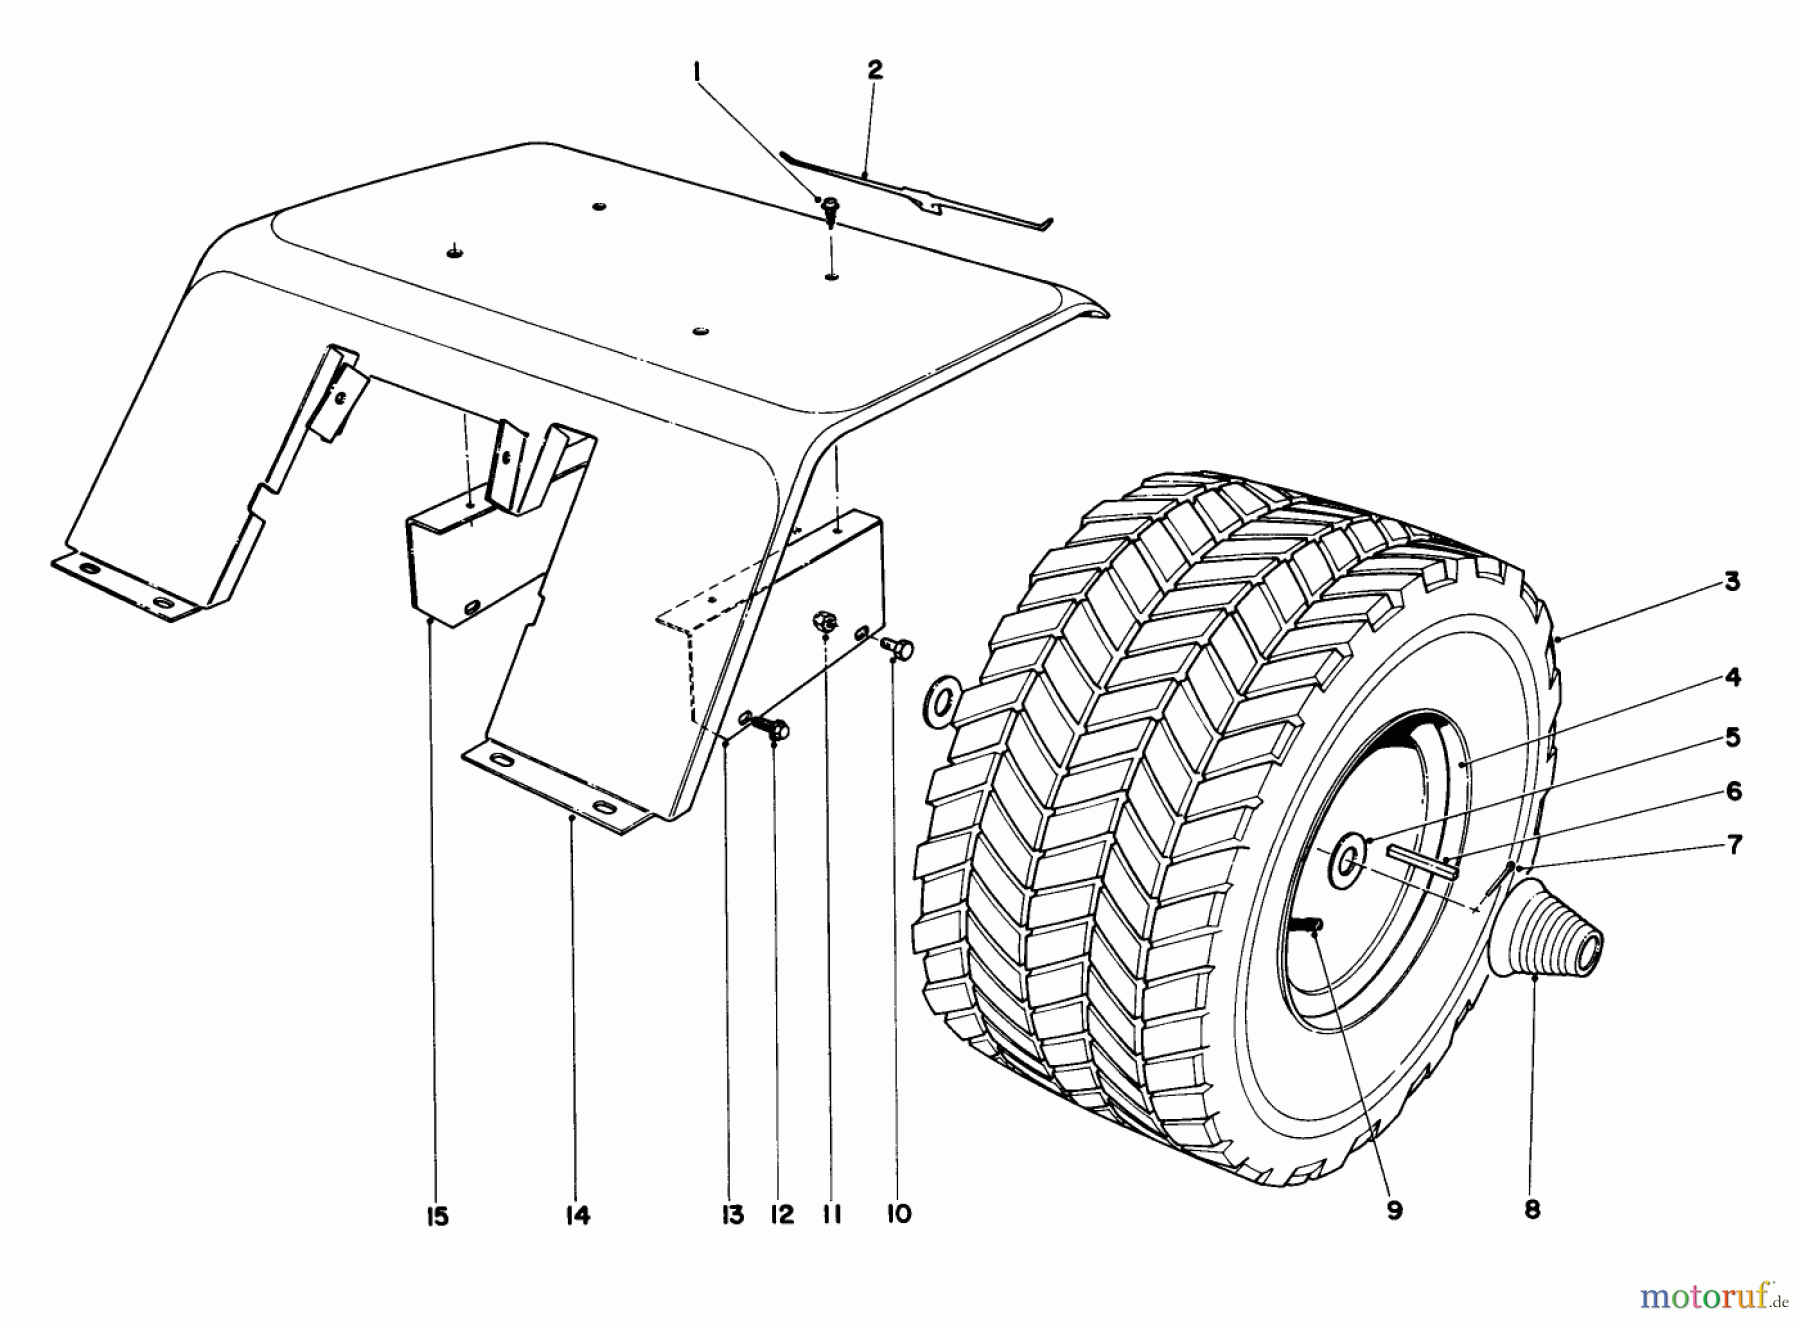  Toro Neu Mowers, Lawn & Garden Tractor Seite 1 55055 (800) - Toro 800 Electric Lawn Tractor, 1971 (1000001-1999999) REAR TIRE AND FENDER ASSEMBLY